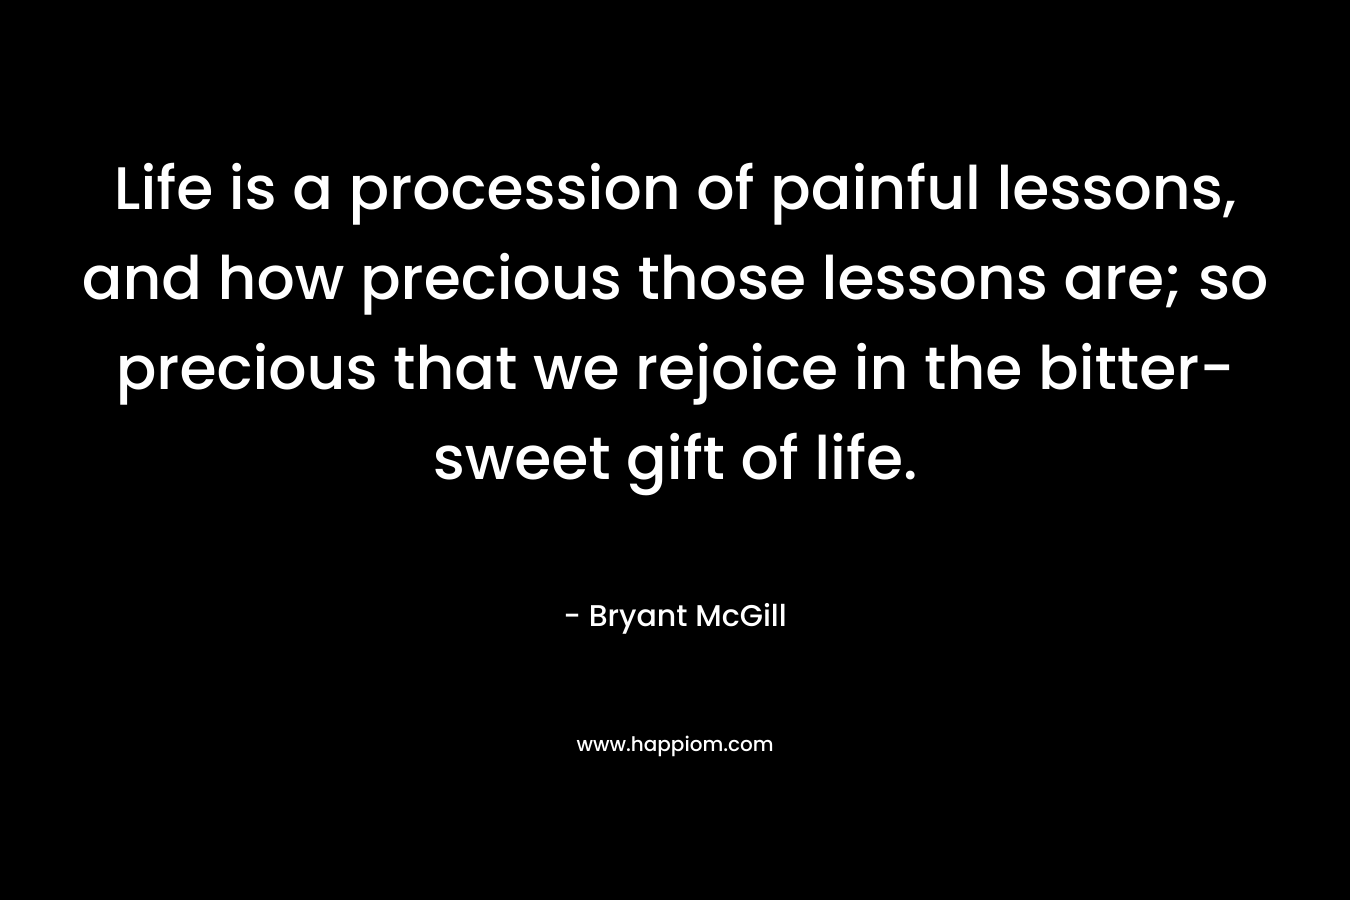 Life is a procession of painful lessons, and how precious those lessons are; so precious that we rejoice in the bitter-sweet gift of life.